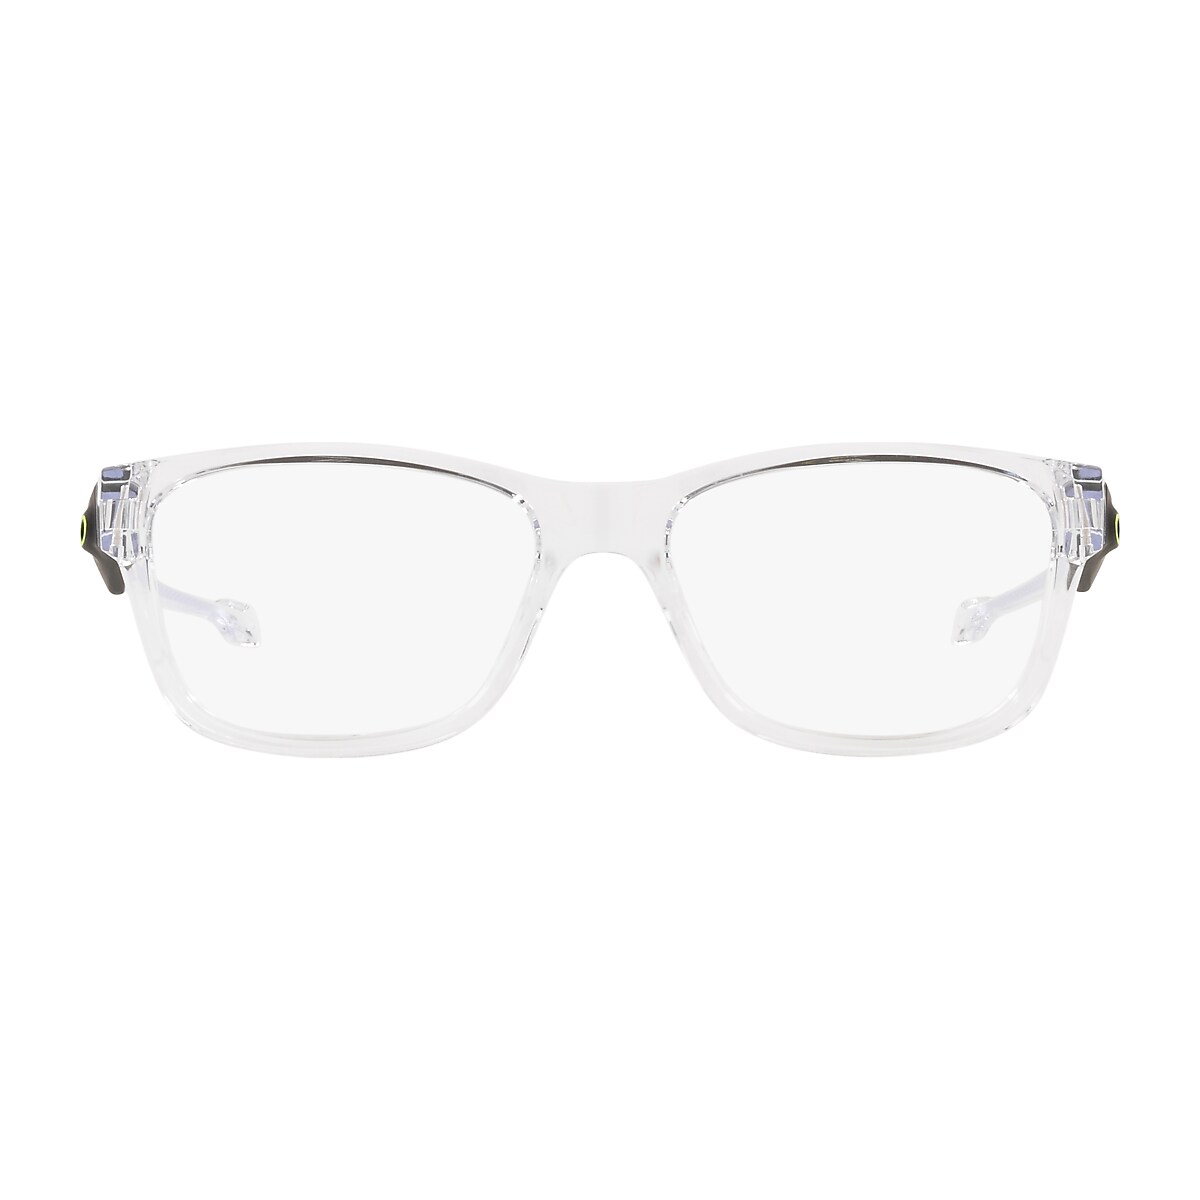 Oakley OY8012 Top Level (Youth Fit) Eyeglasses